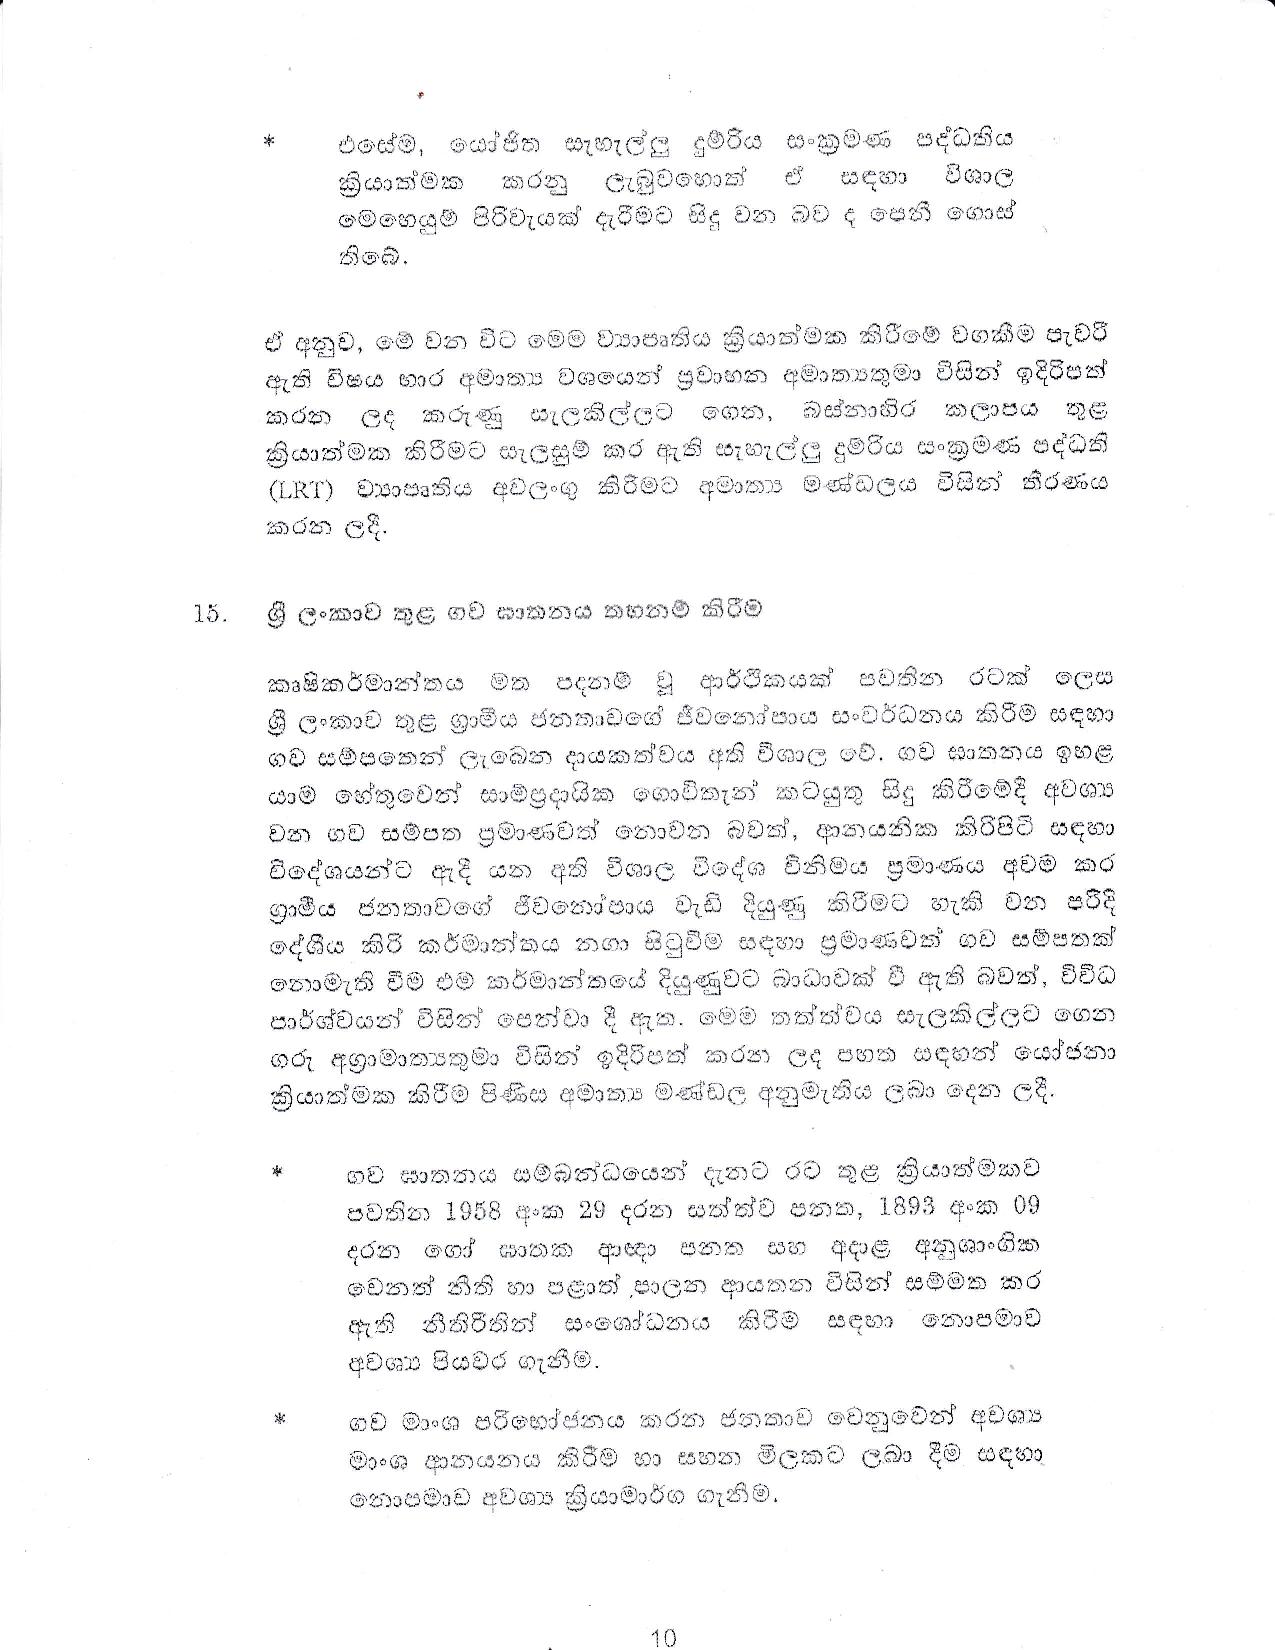 Cabinet Decision on 28.09.2020 page 010